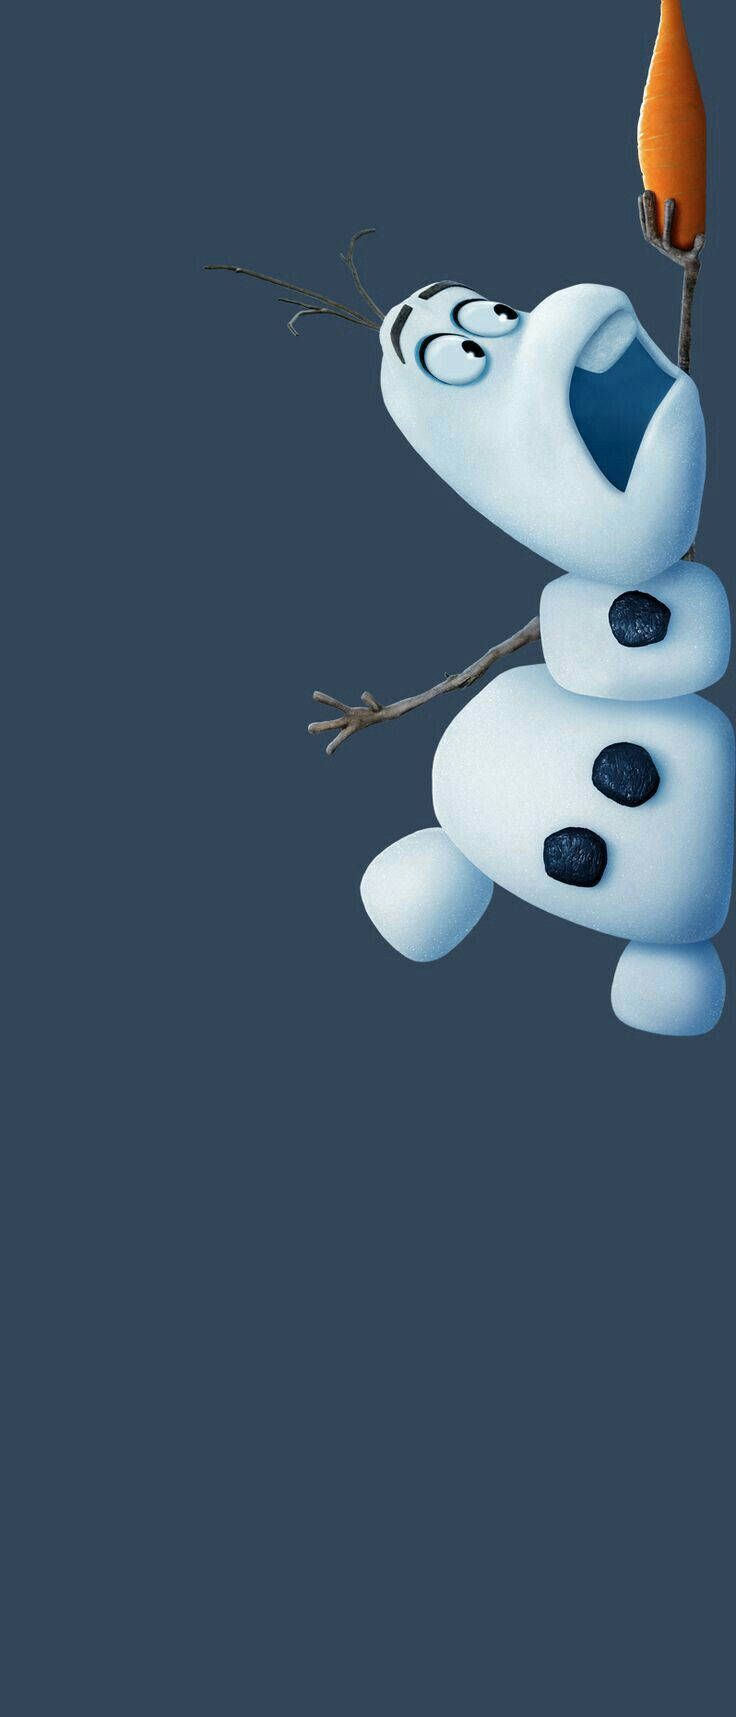 Free Olaf Wallpaper Downloads, Olaf Wallpaper for FREE